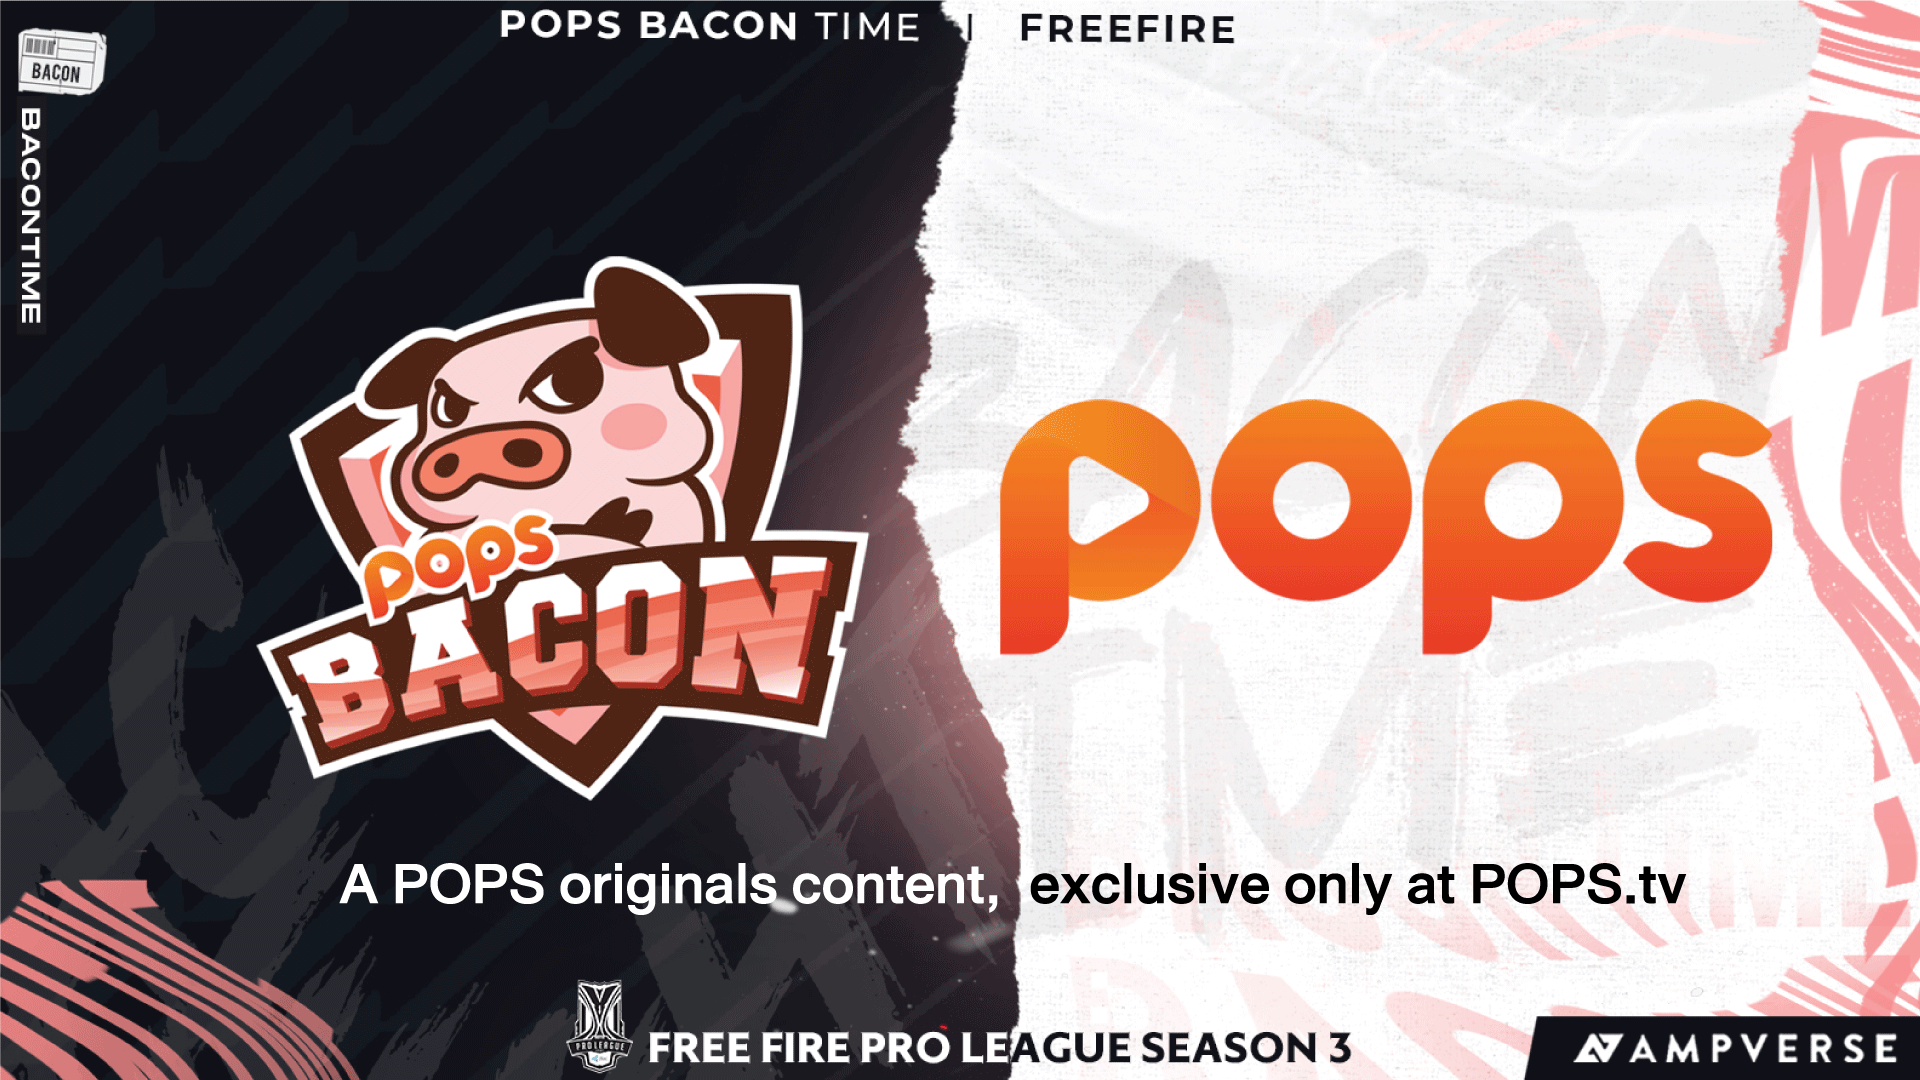 POPS Bacon Time 1492020